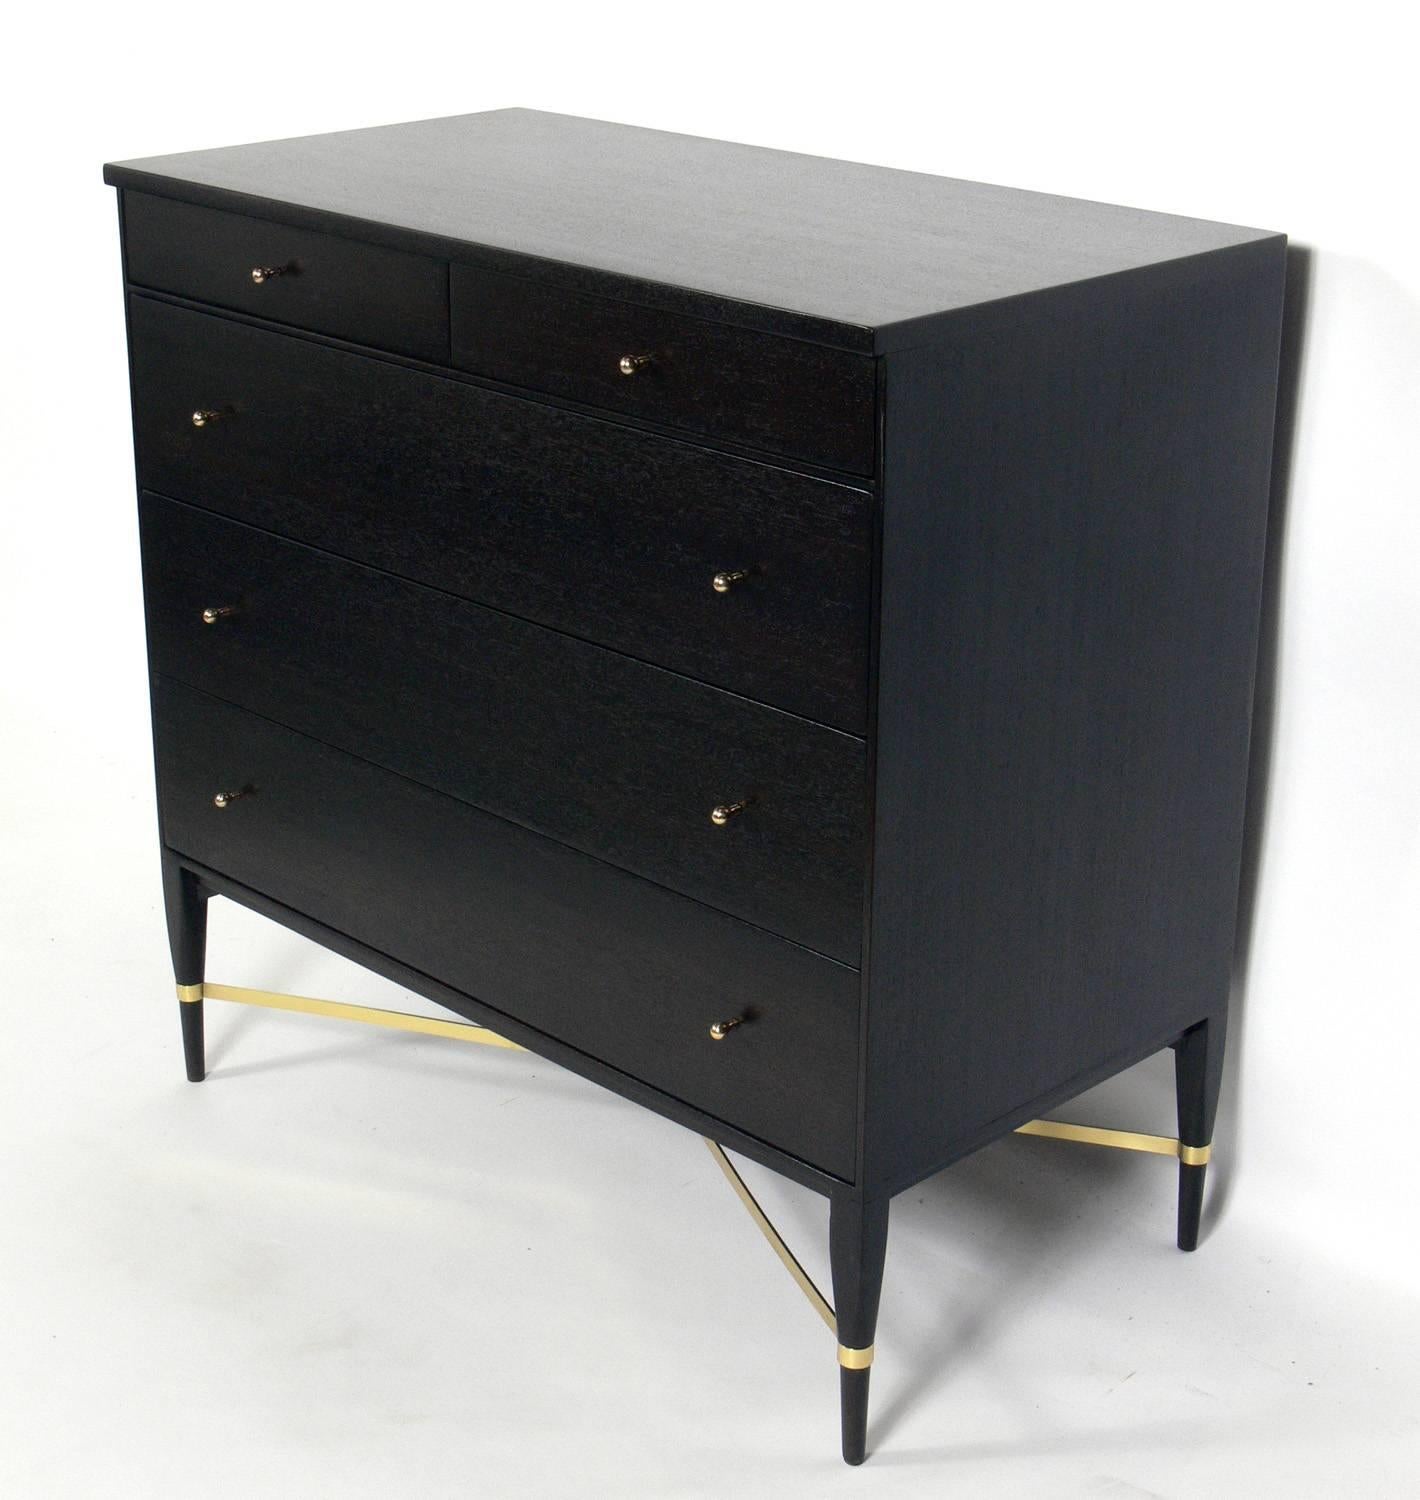 Mid-Century Modern dresser or chest of drawers, designed by Paul McCobb for Calvin, American, circa 1950s. It has been completely restored in an ultra deep brown color with the brass hardware polished and lacquered. Please see our other Paul McCobb